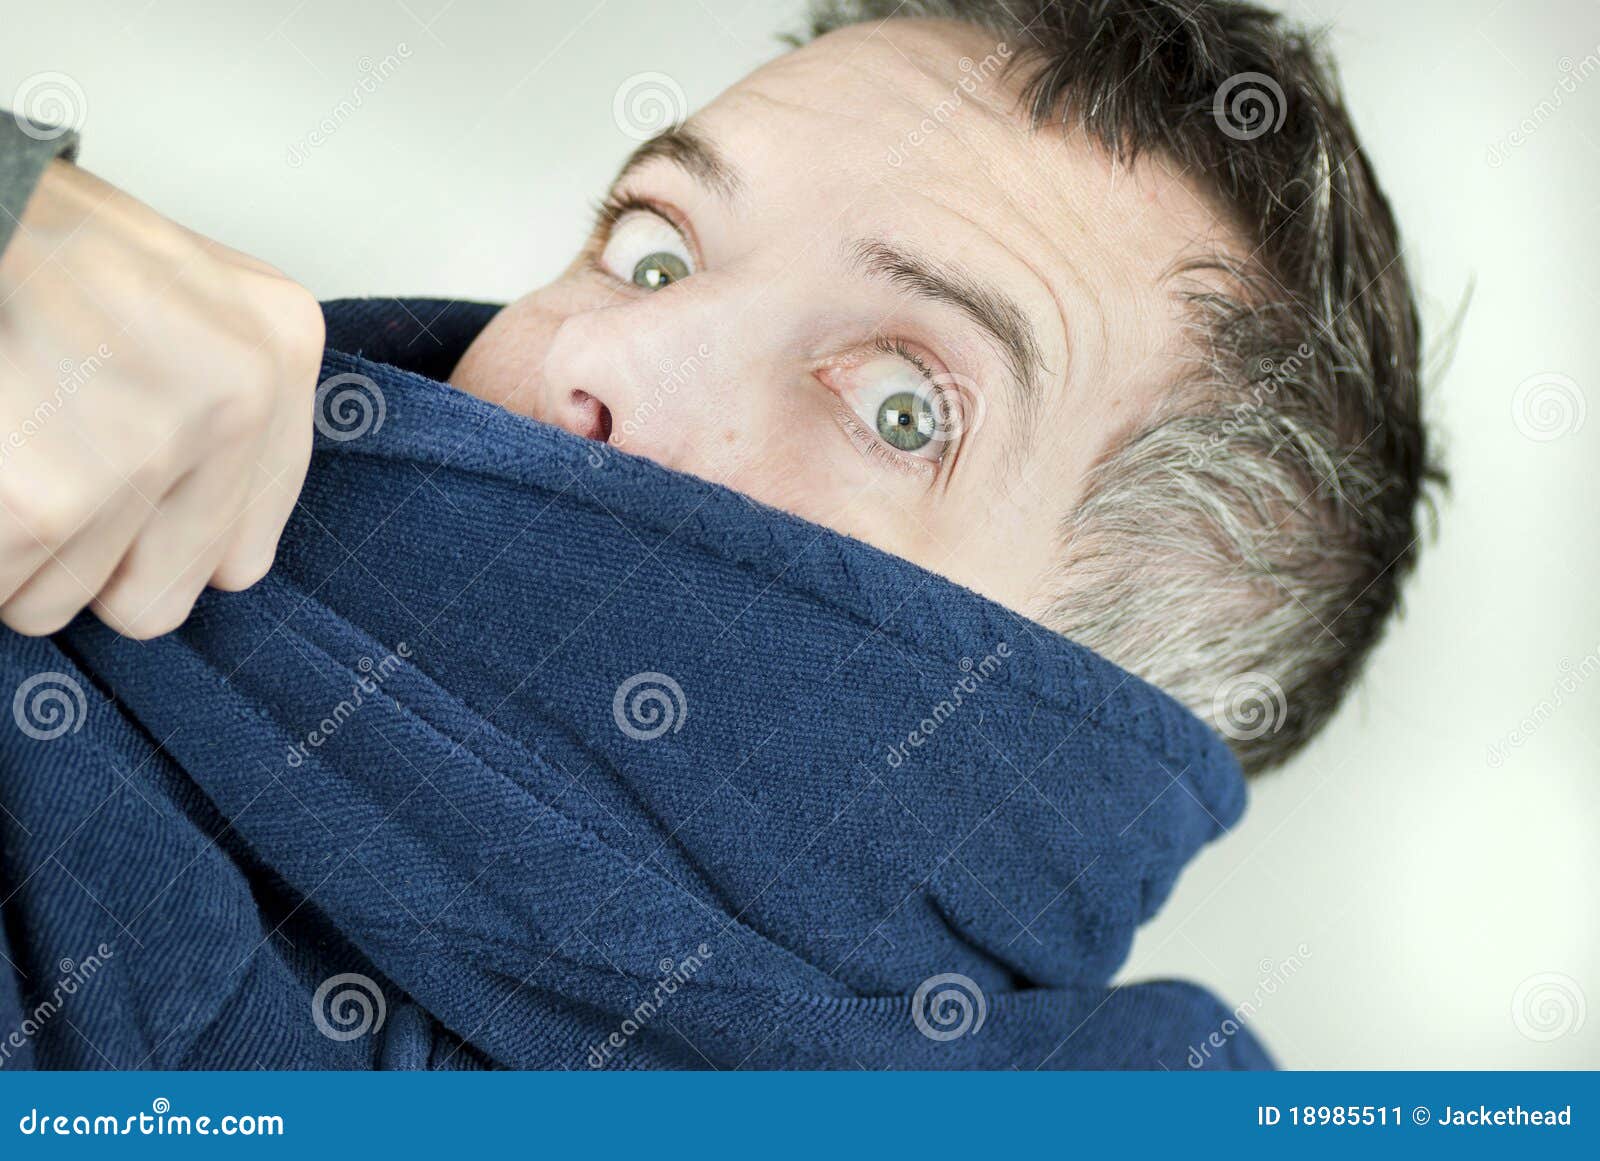 man wearing housecoat being yanked off camera